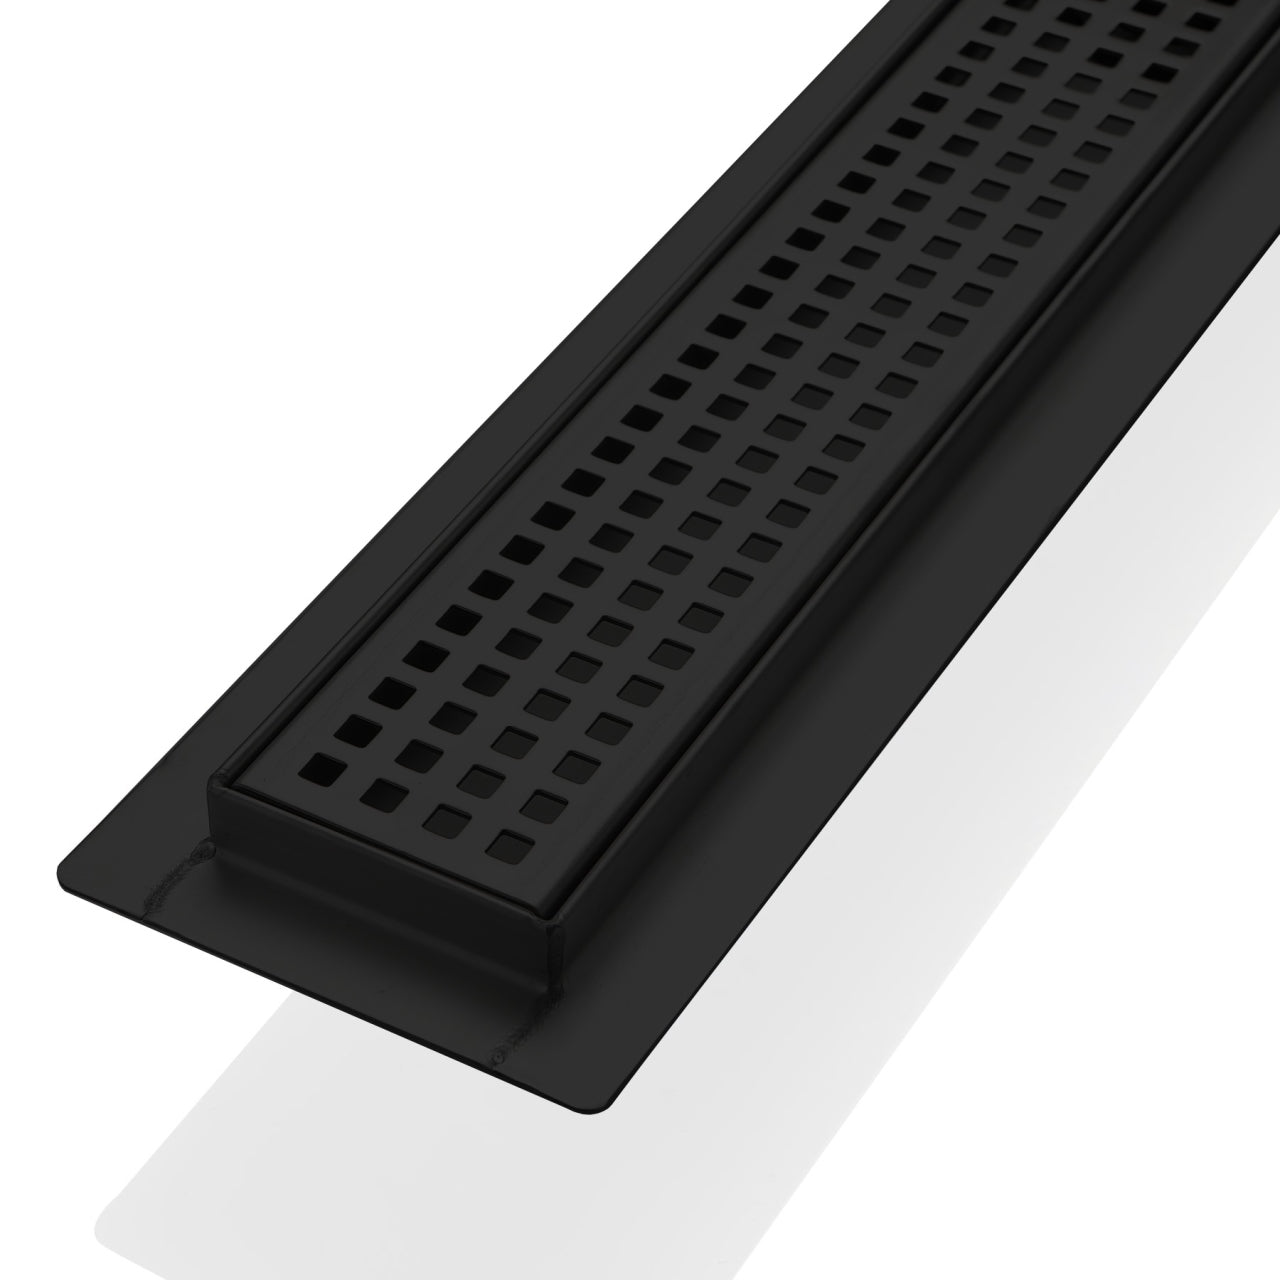 Kube 35.5" Linear Drain with Pixel Grate - Bhdepot 